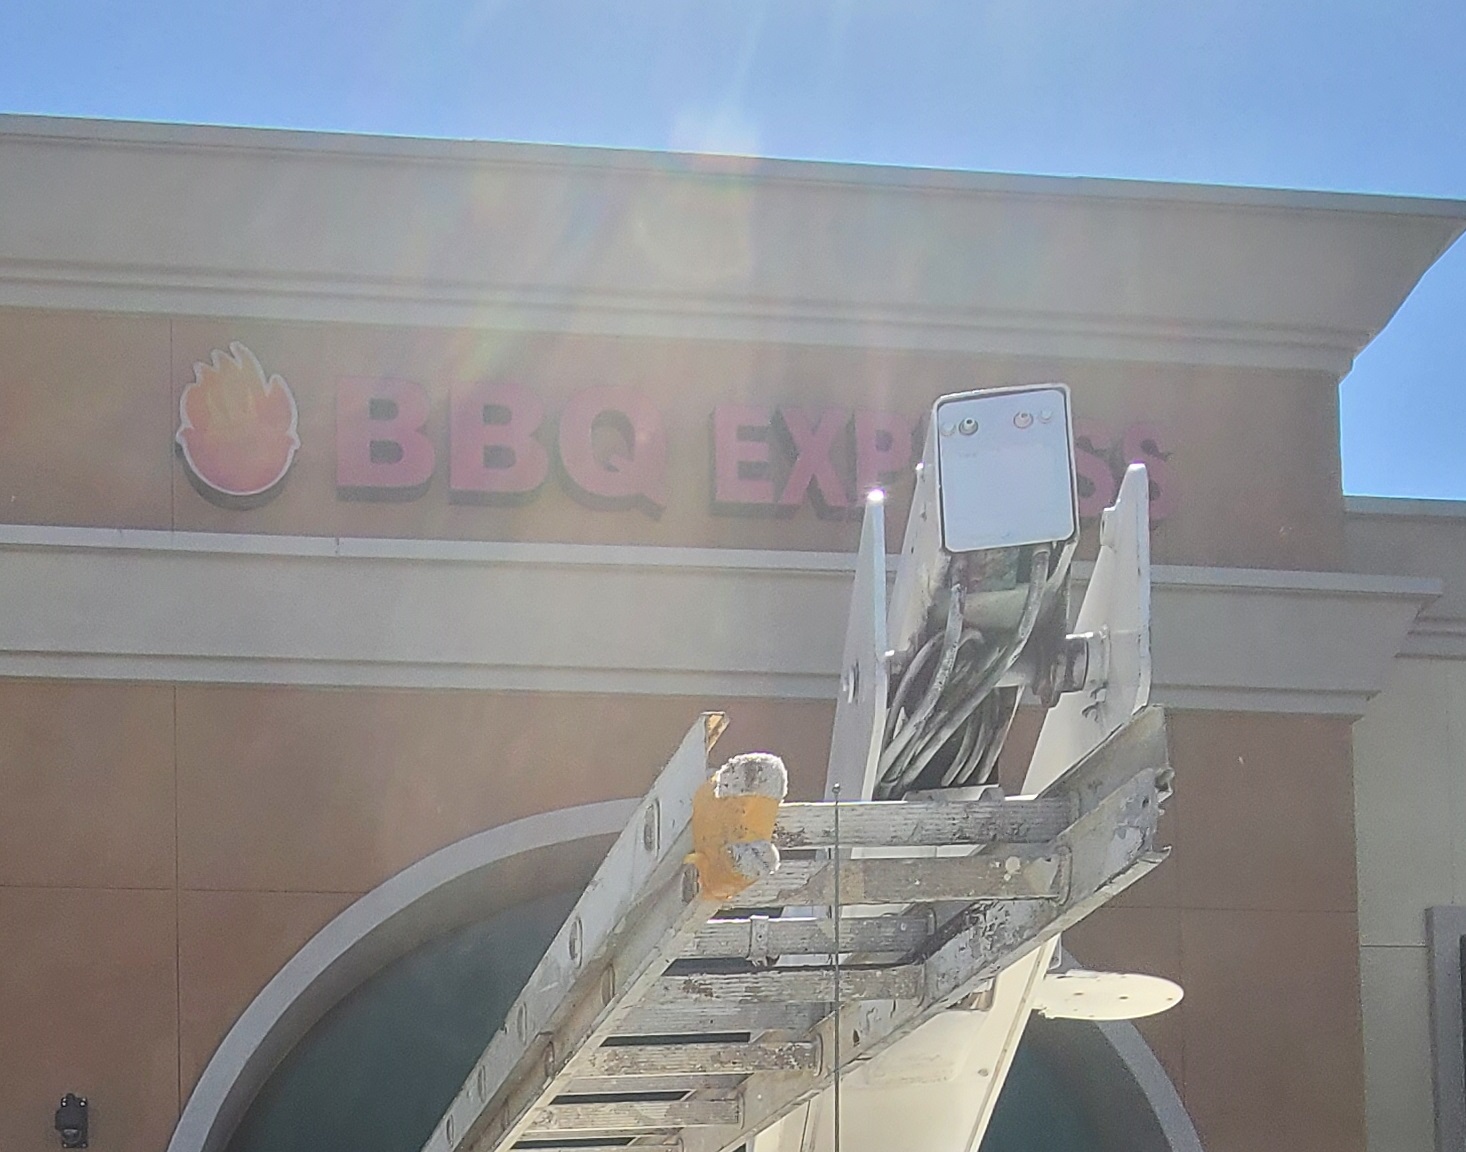 This is the light box restaurant sign repair service we did for BBQ Express, their flame logo has burned out over time so we helped this new customer in Los Angeles repair his old sign